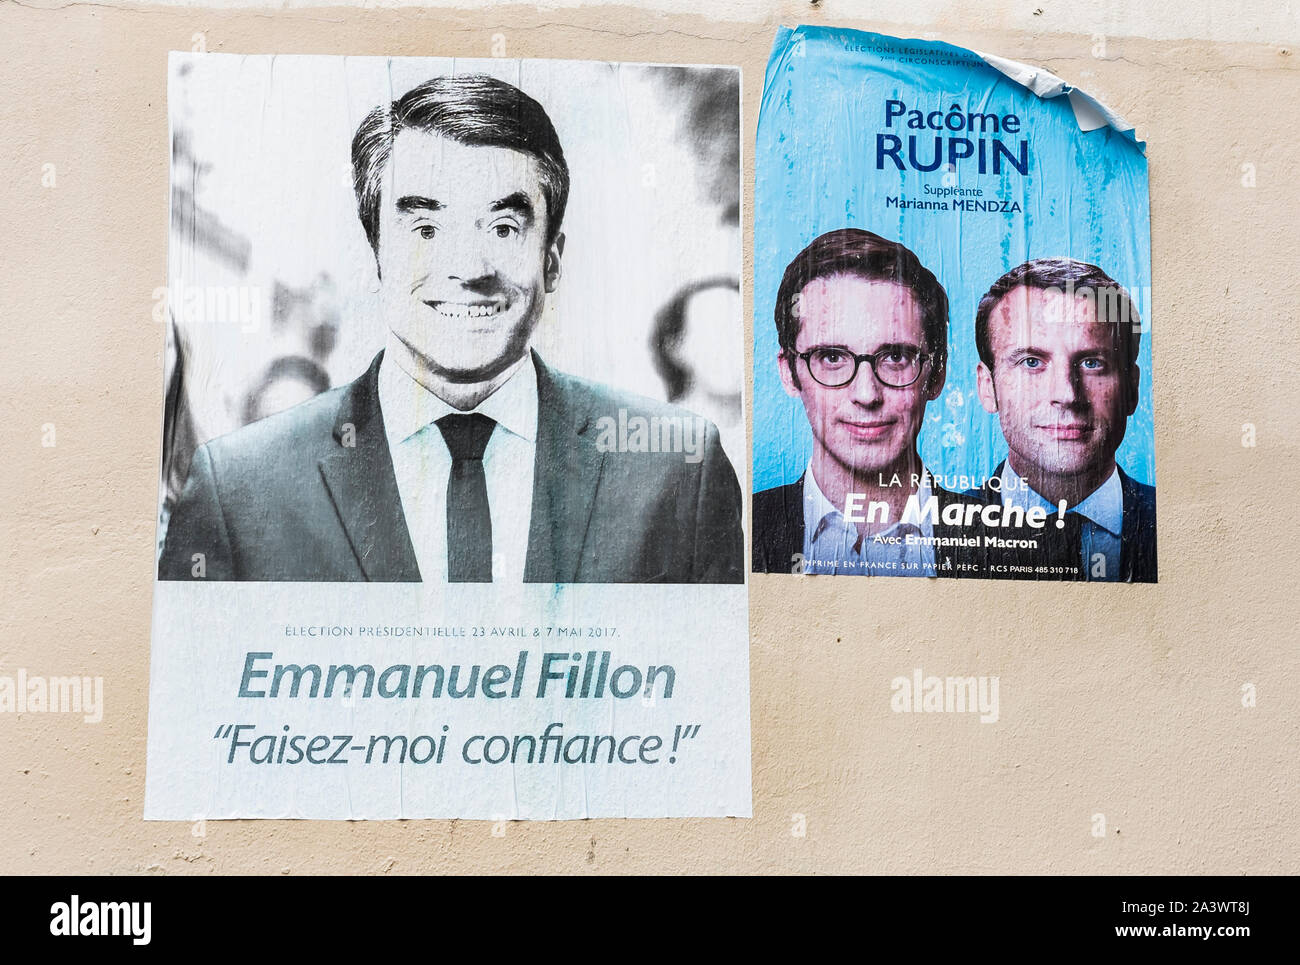 faded posters of 2017 french presidential elections showing francois fillon, emmanuel macron and pacome rupin Stock Photo